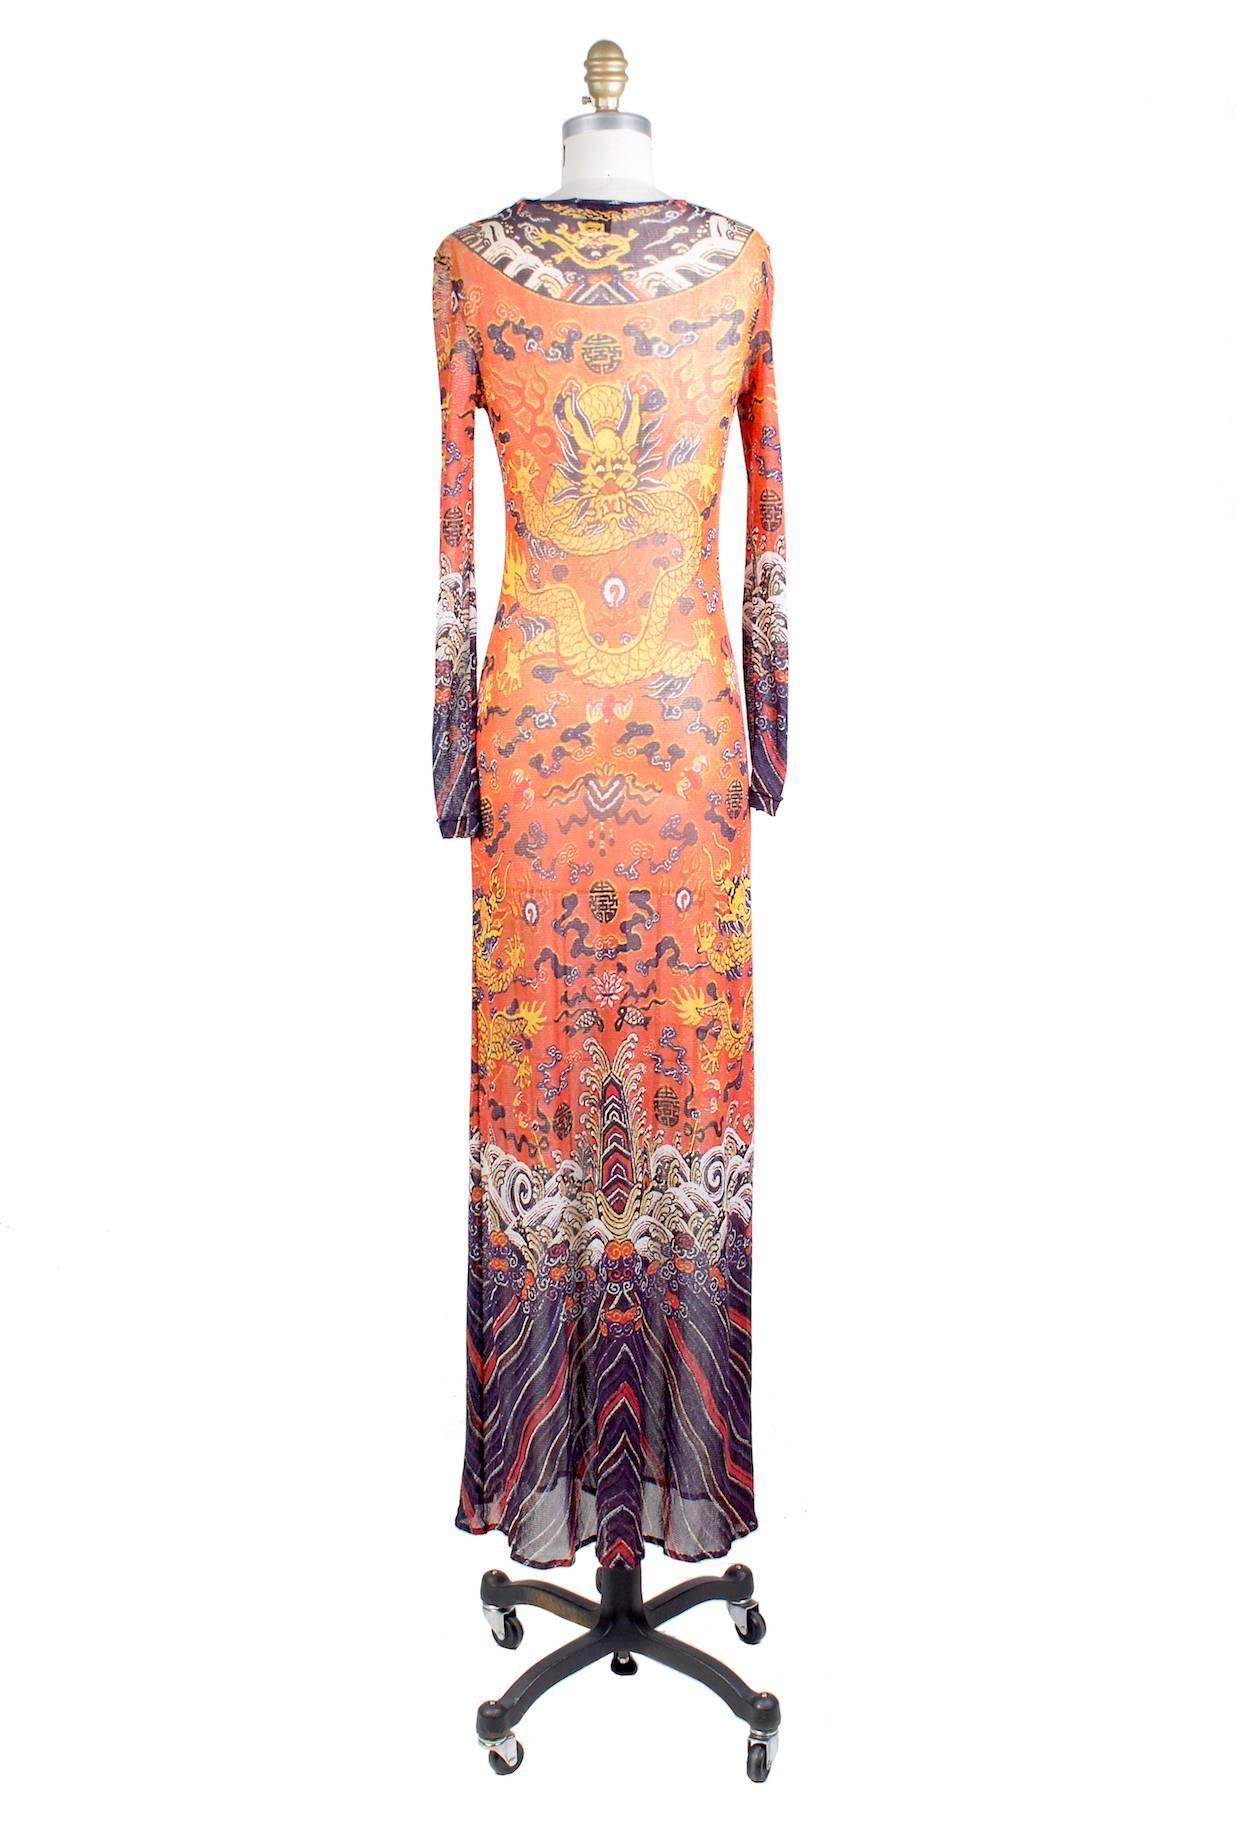 This is a long sleeve maxi dress by Vivienne Tam circa 1990s.  It features an elaborate dragon print and is entirely of mesh.  There is stretch to the dress.

15